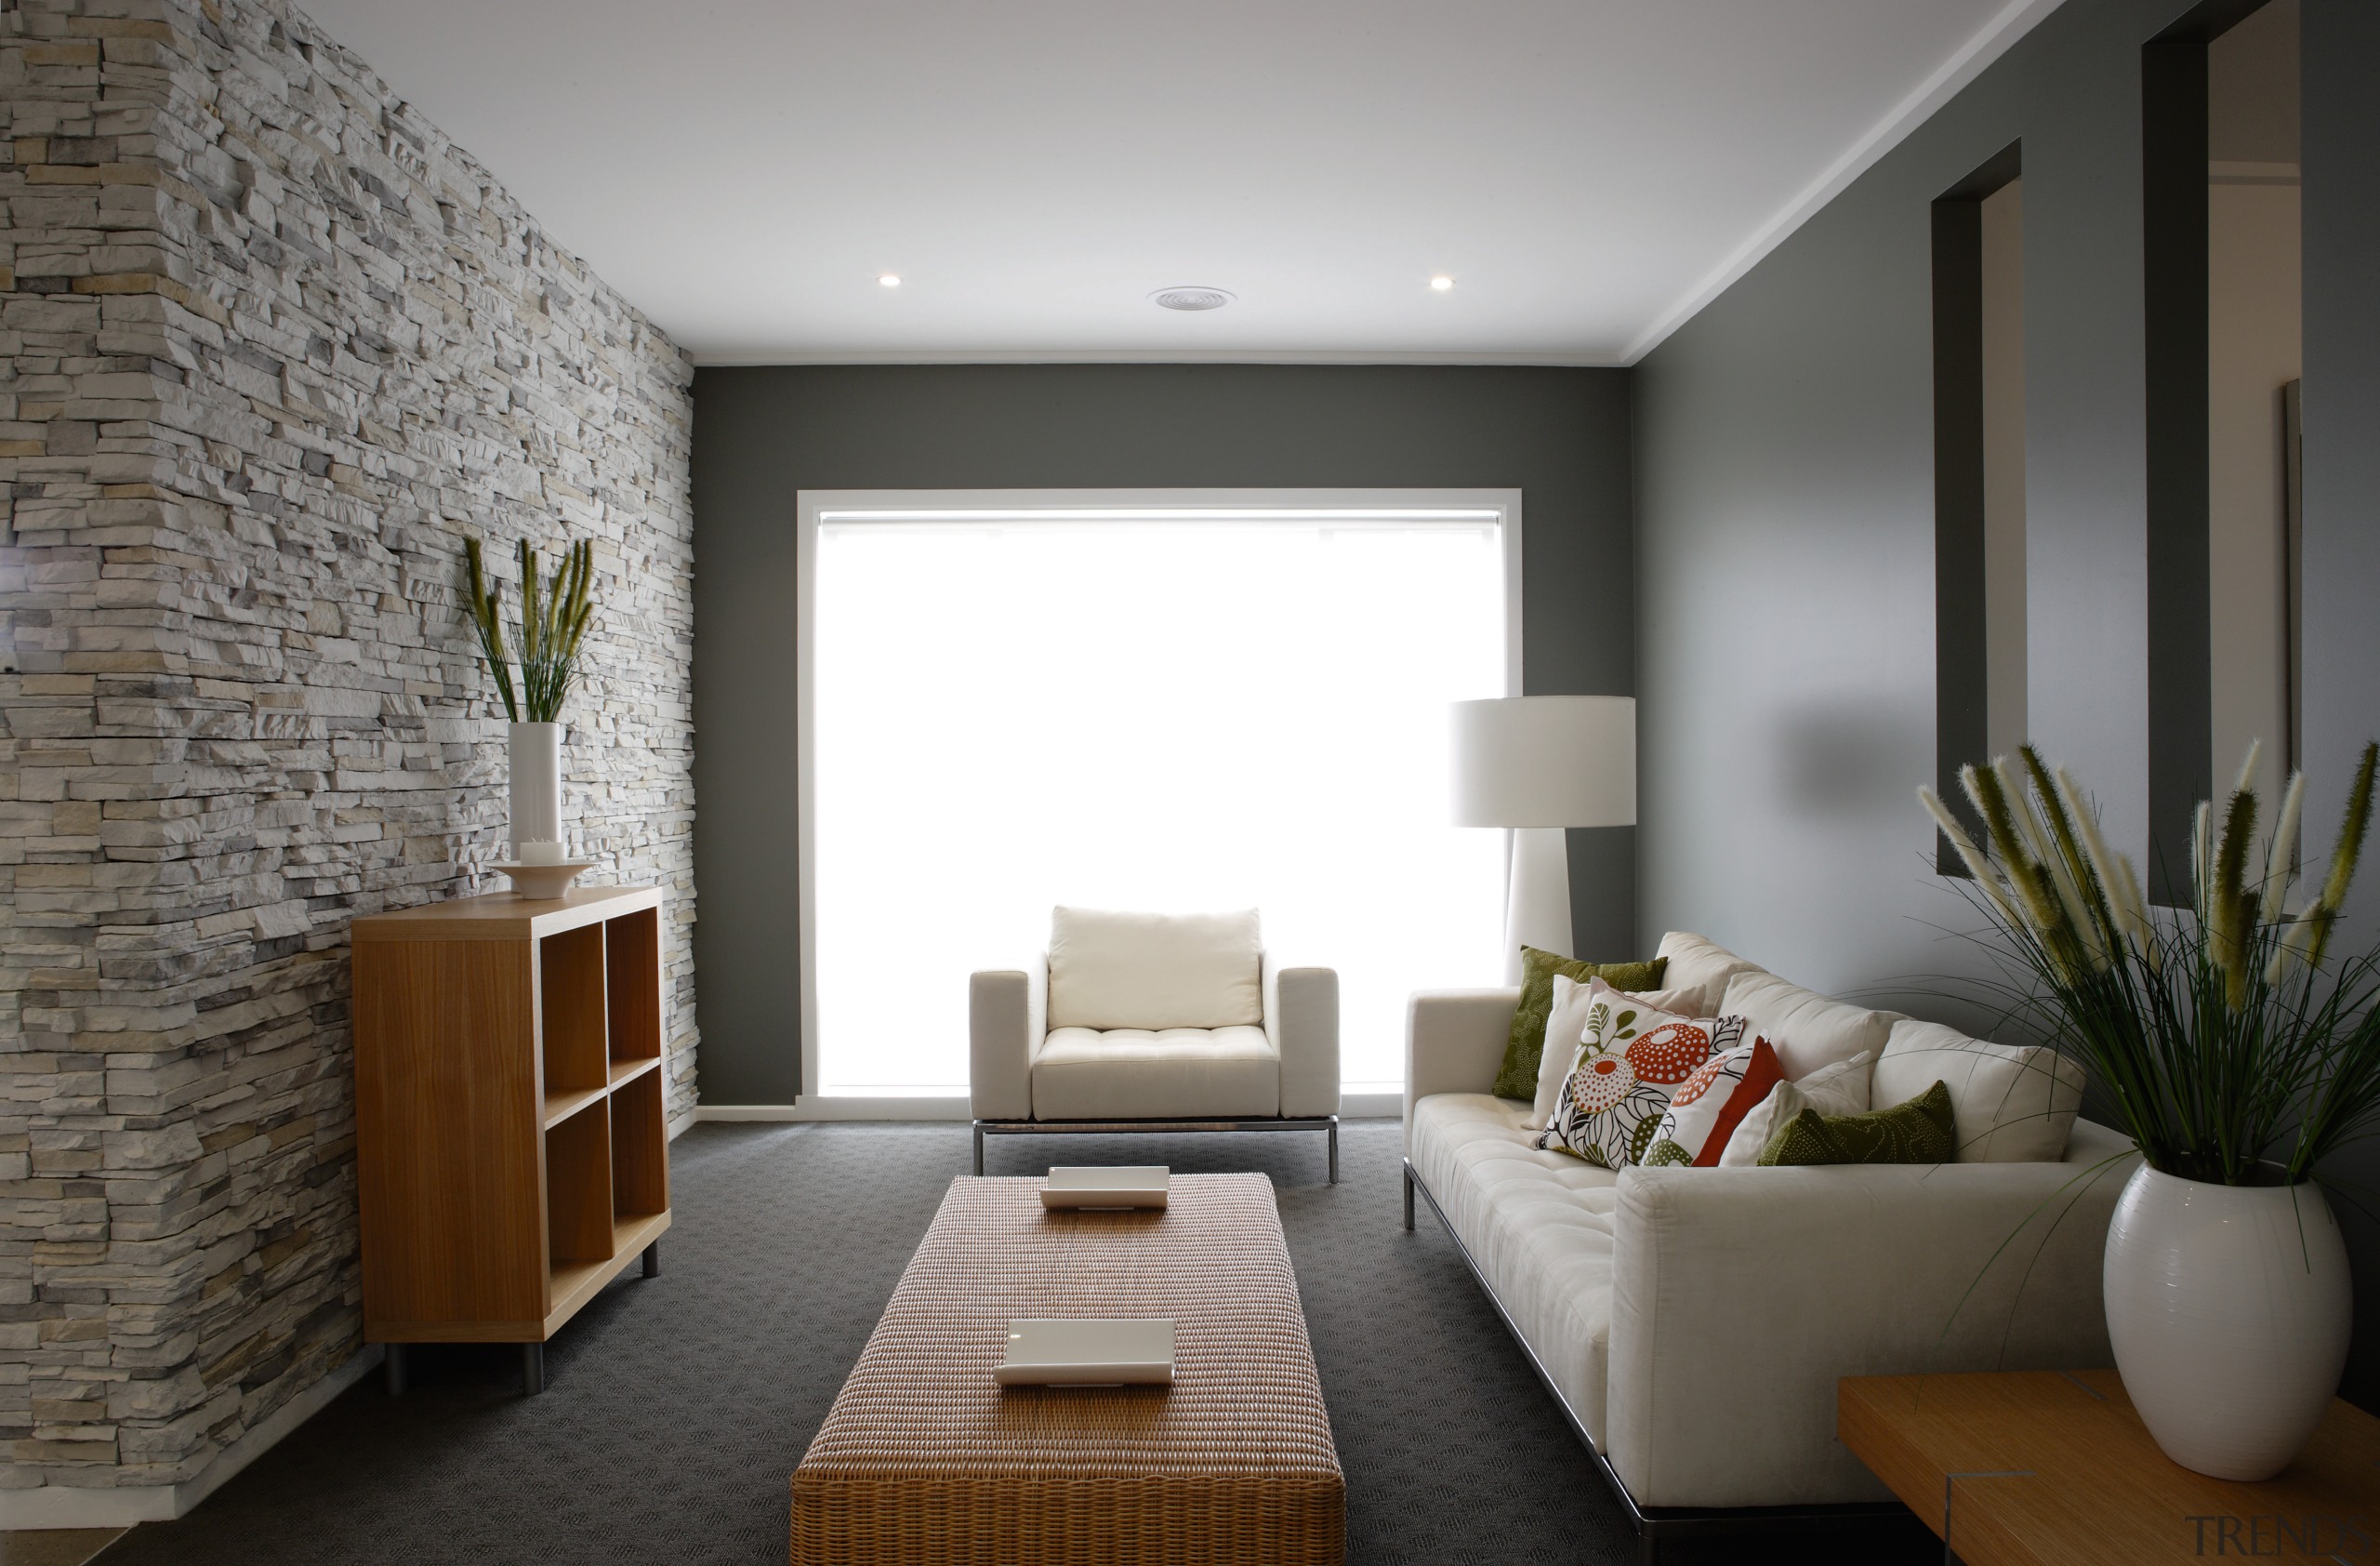 Lounge room with cream sofas, stone wall and ceiling, interior design, living room, room, gray, black